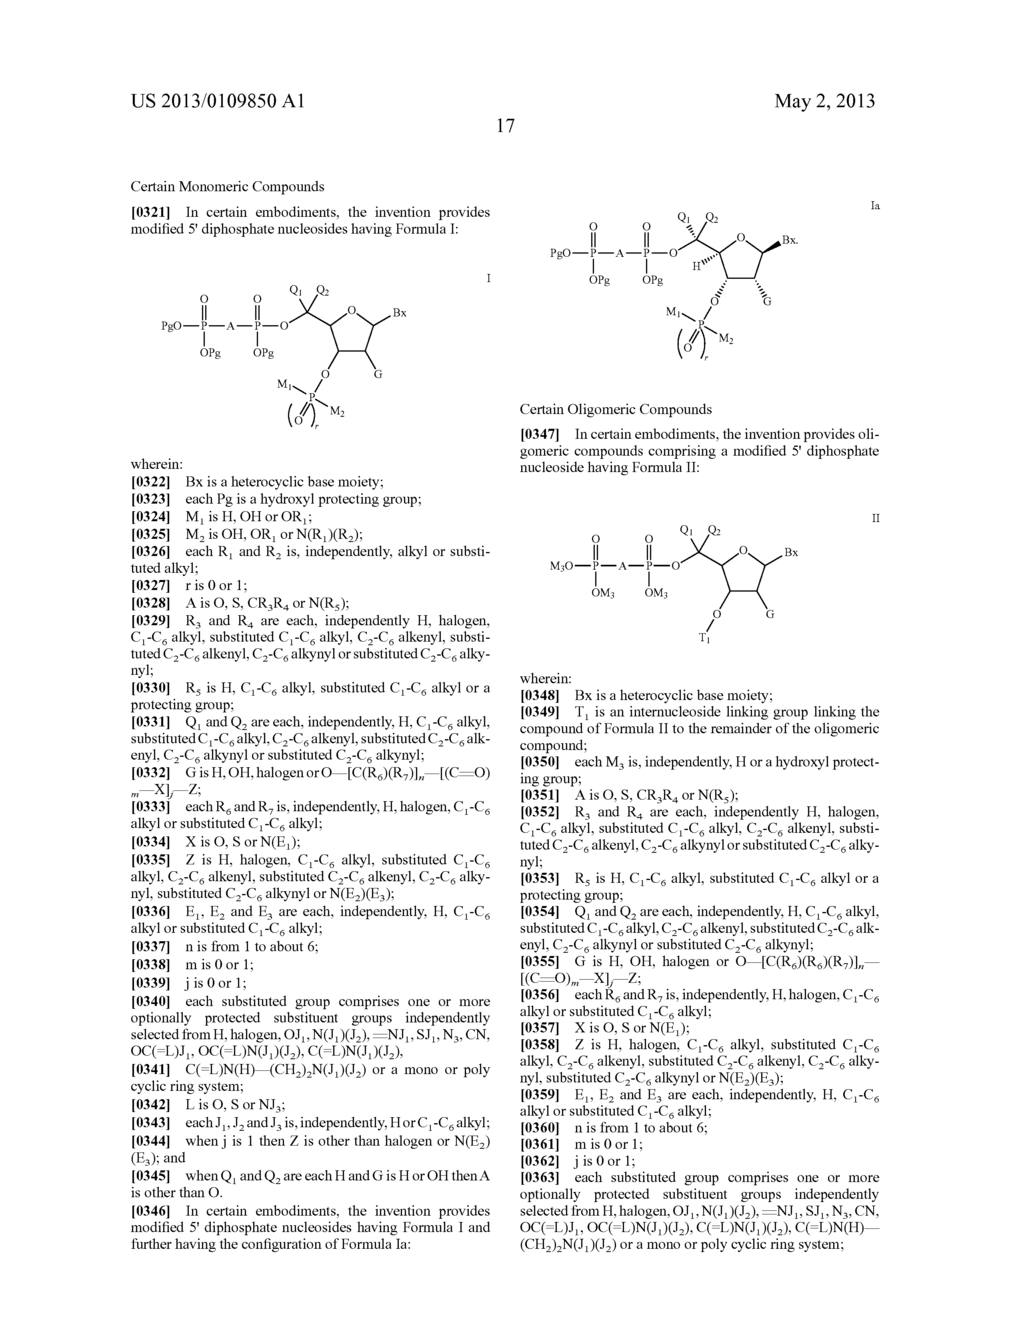 MODIFIED 5' DIPHOSPHATE NUCLEOSIDES AND OLIGOMERIC COMPOUNDS PREPARED     THEREFROM - diagram, schematic, and image 18